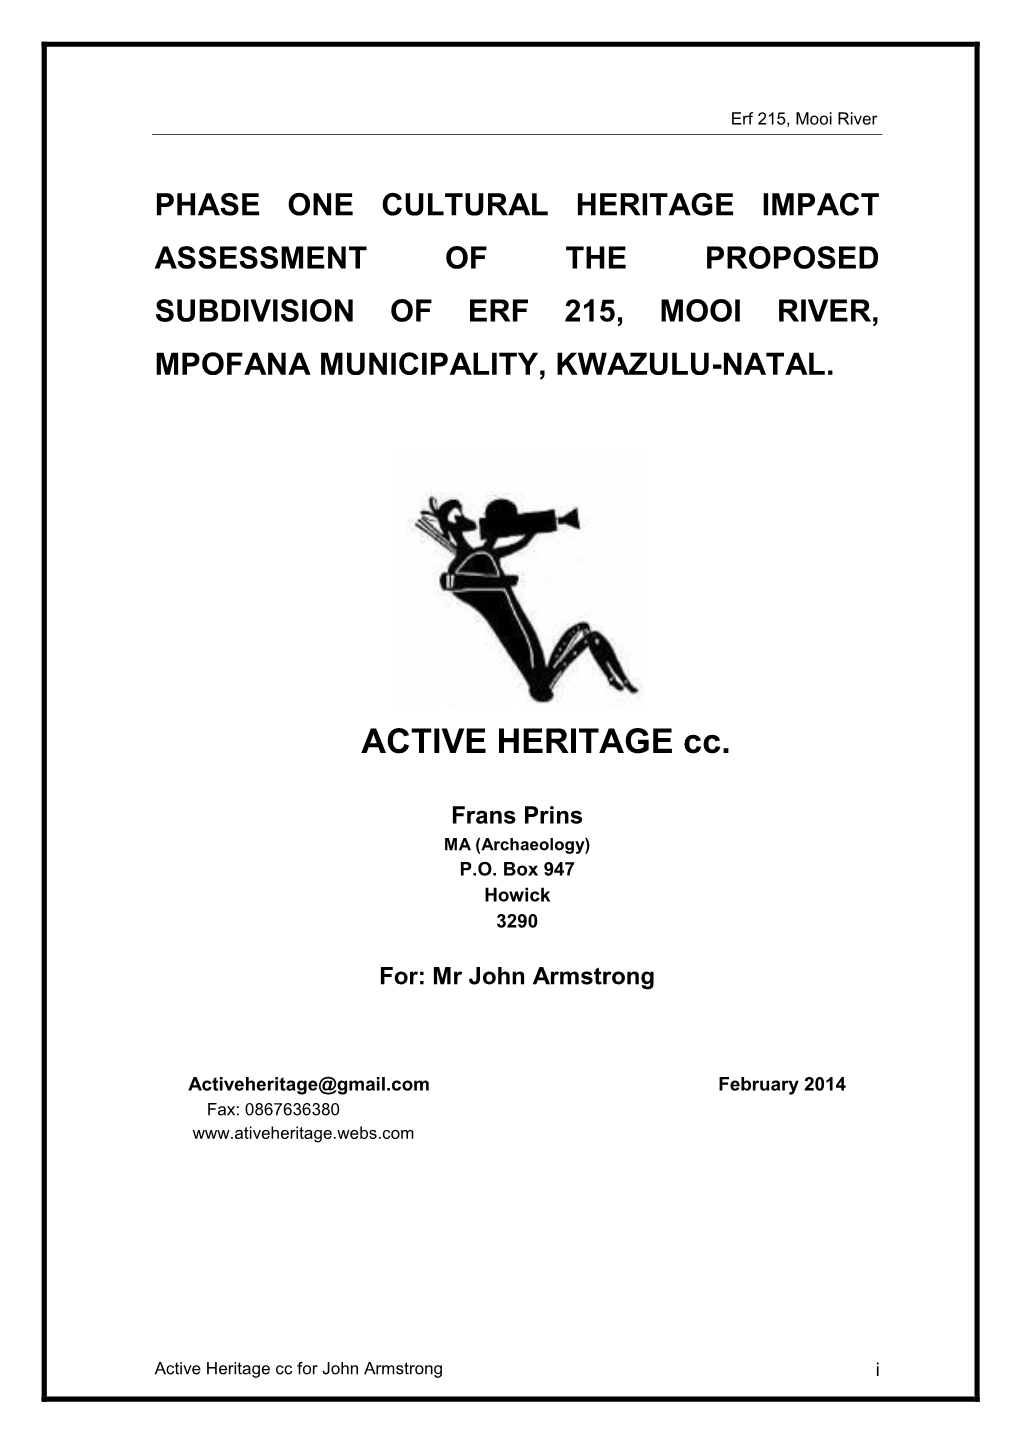 Assessment of the Proposed Subdivision of Erf 215, Mooi River, Mpofana Municipality, Kwazulu-Natal